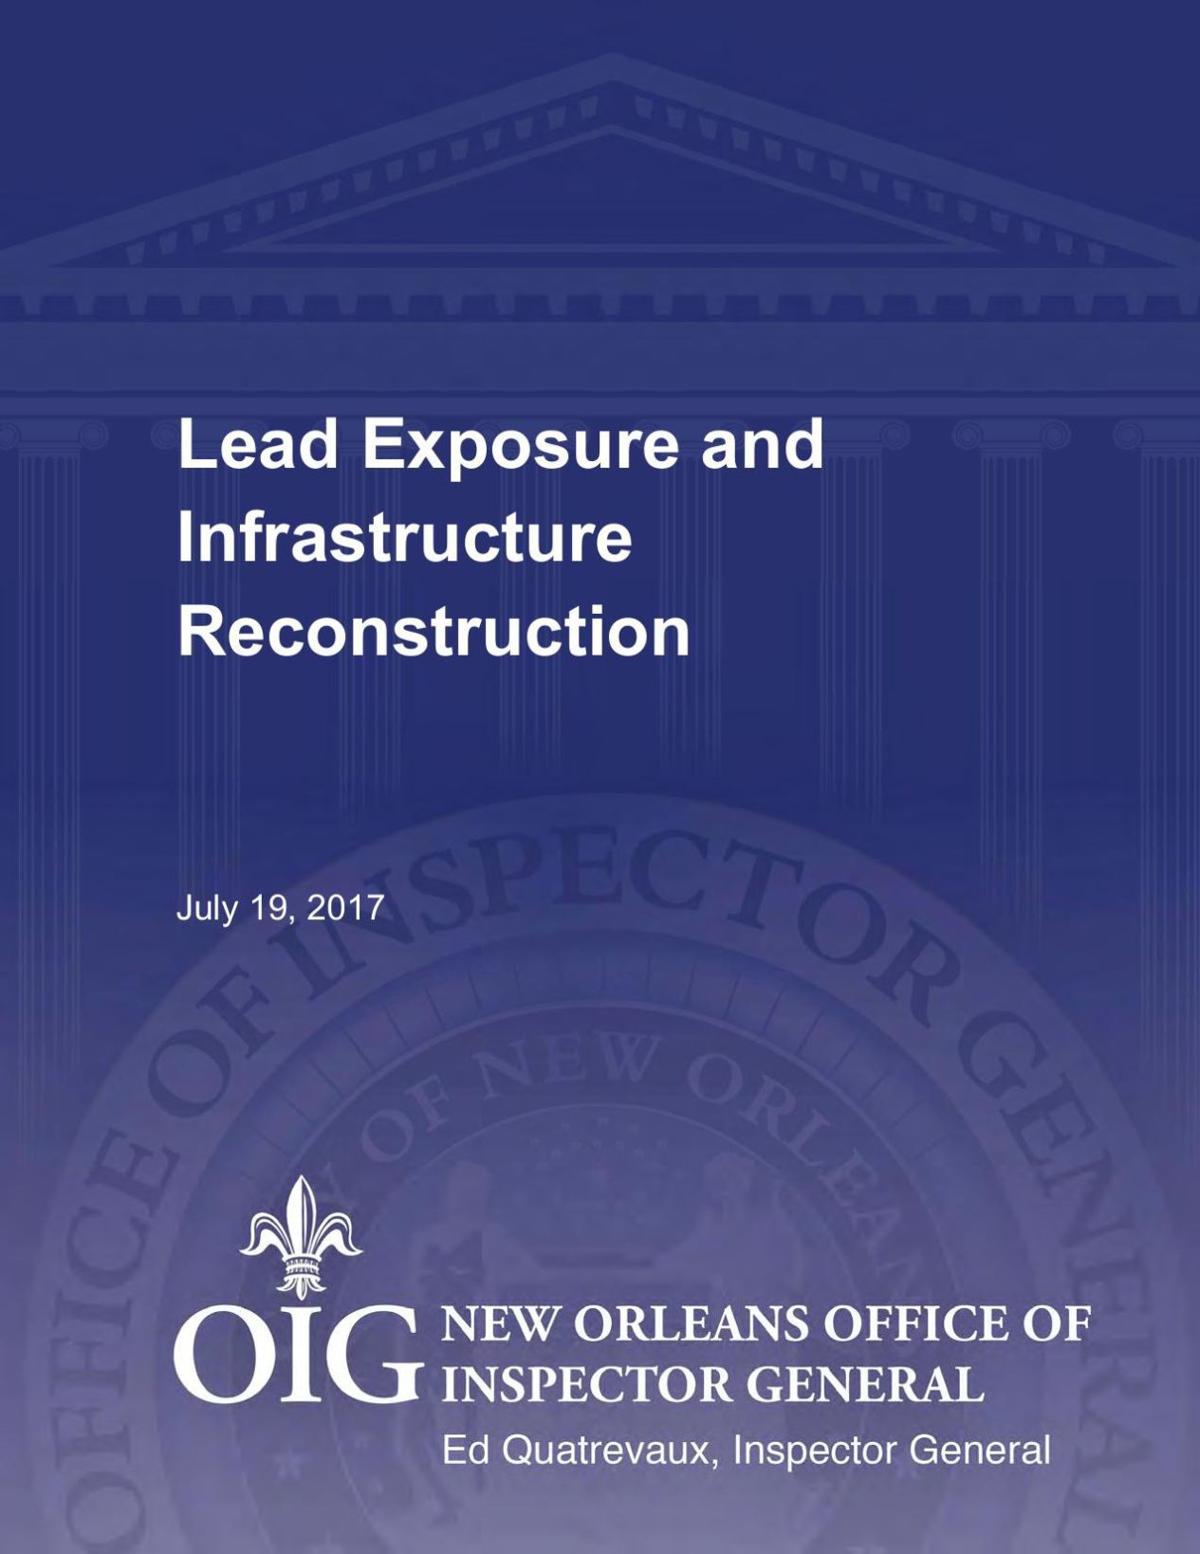 Office of Inspector General's report on Sewerage and Water Board's infrastructure program and concerns about lead contamination